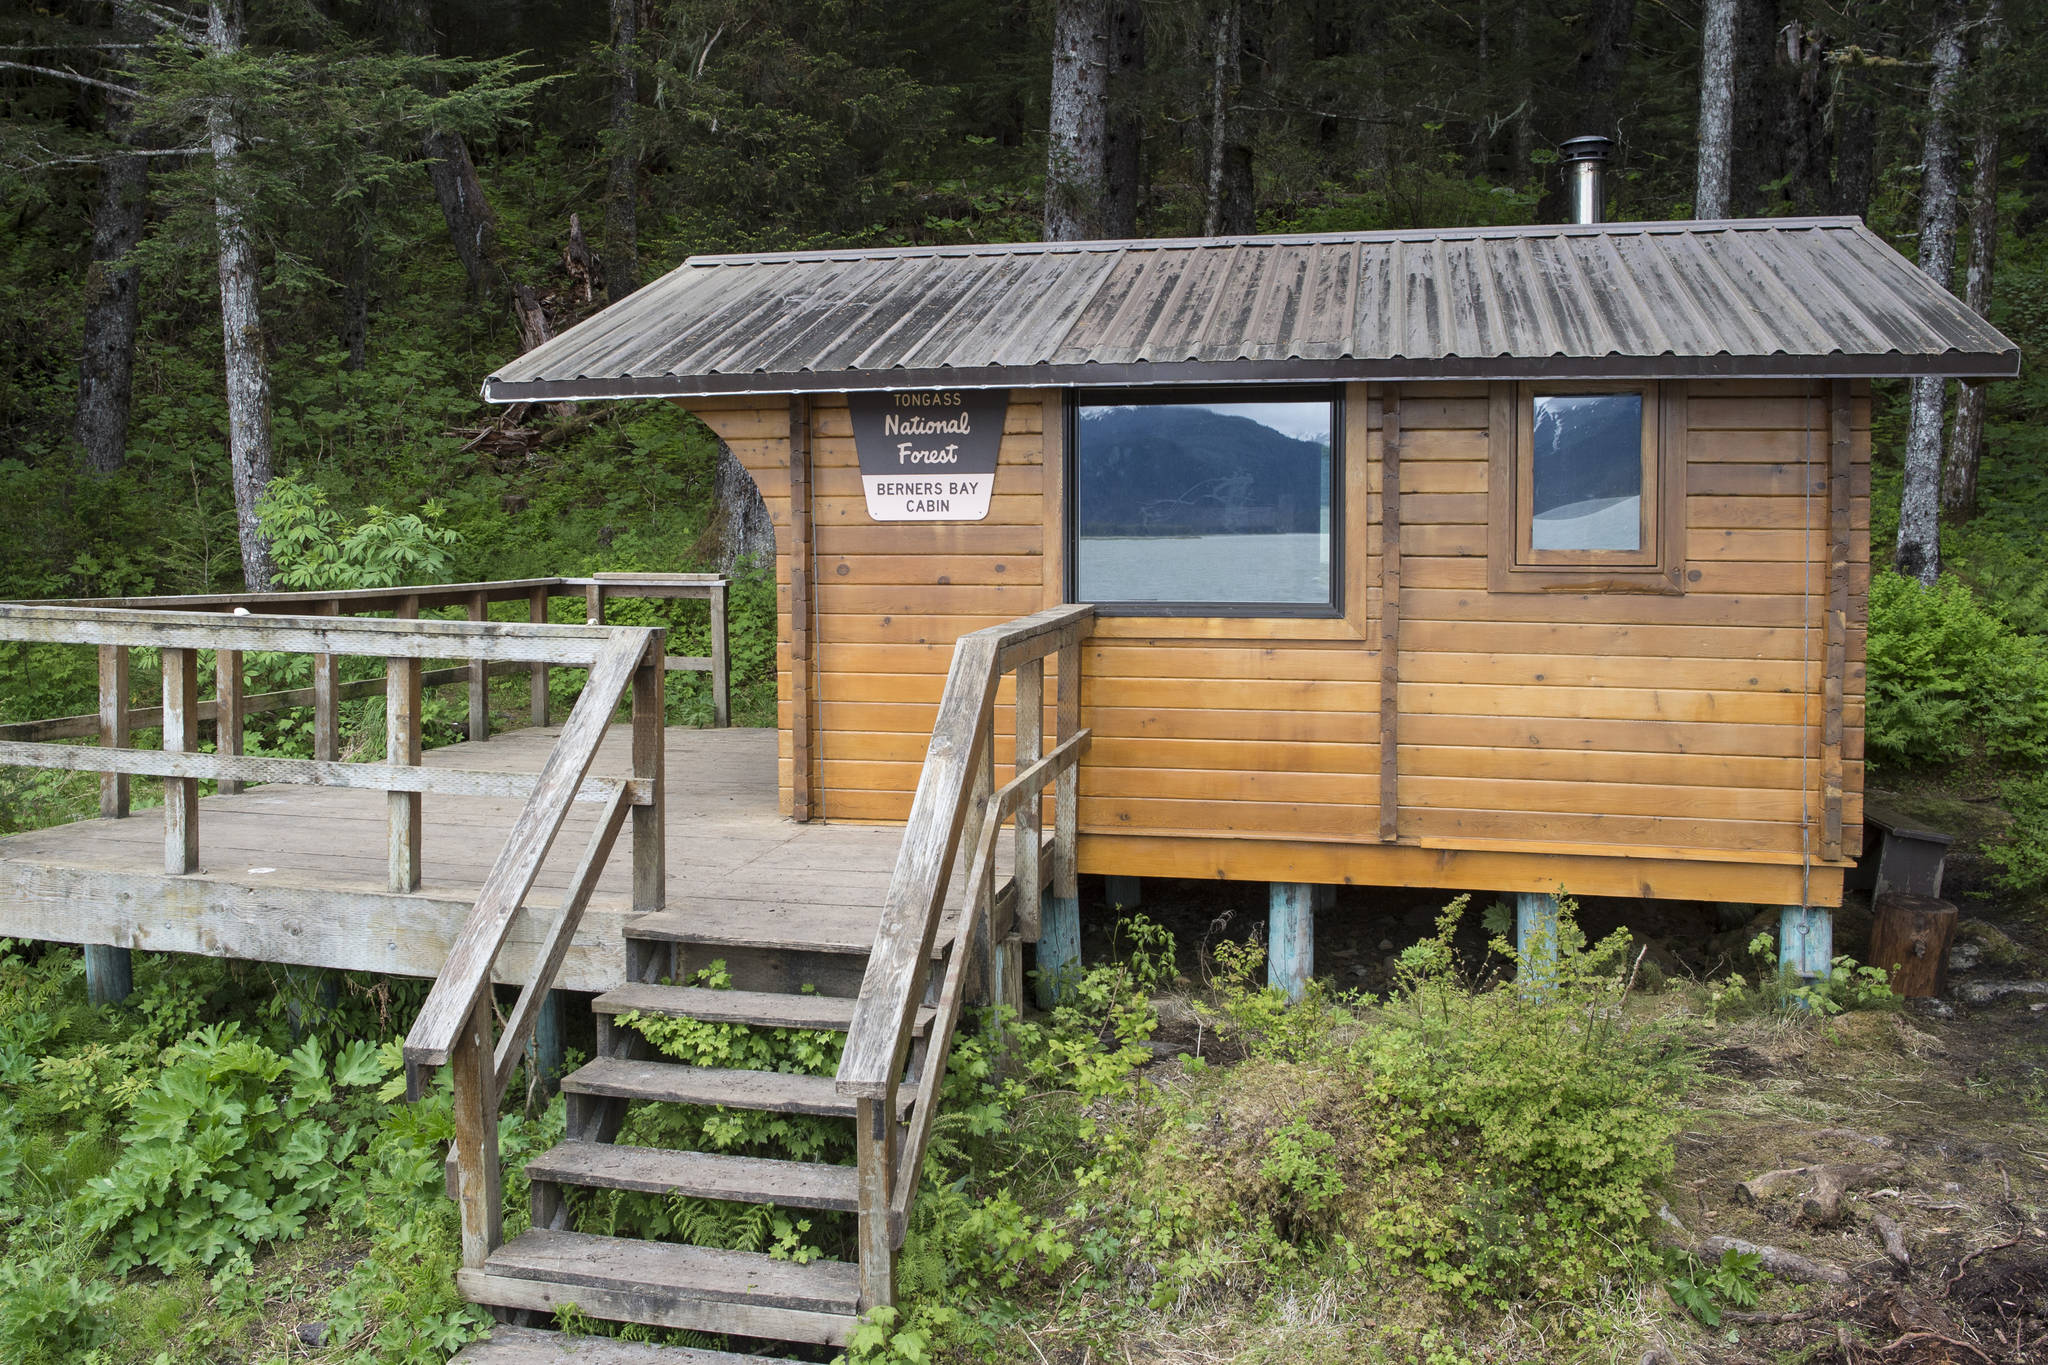 Kickoff event to discuss new public use cabin in Juneau